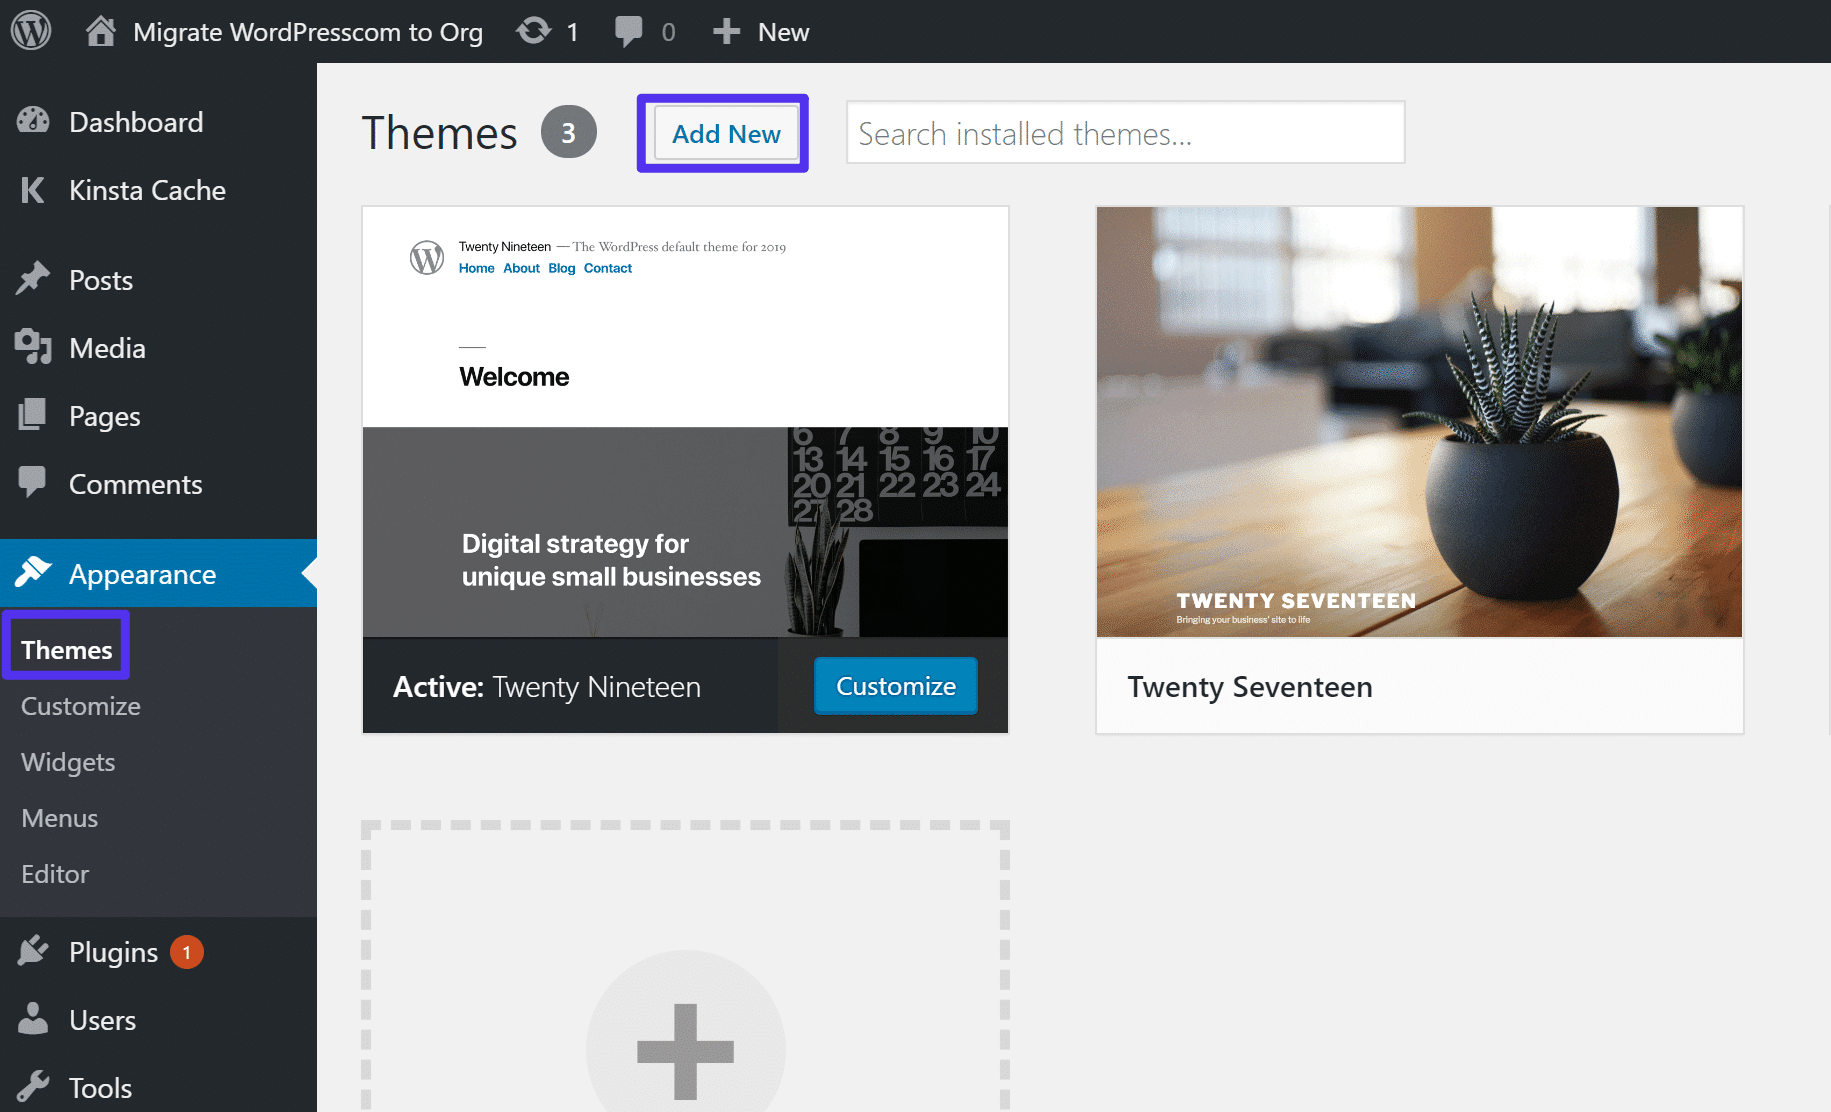 How to install a new WordPress theme